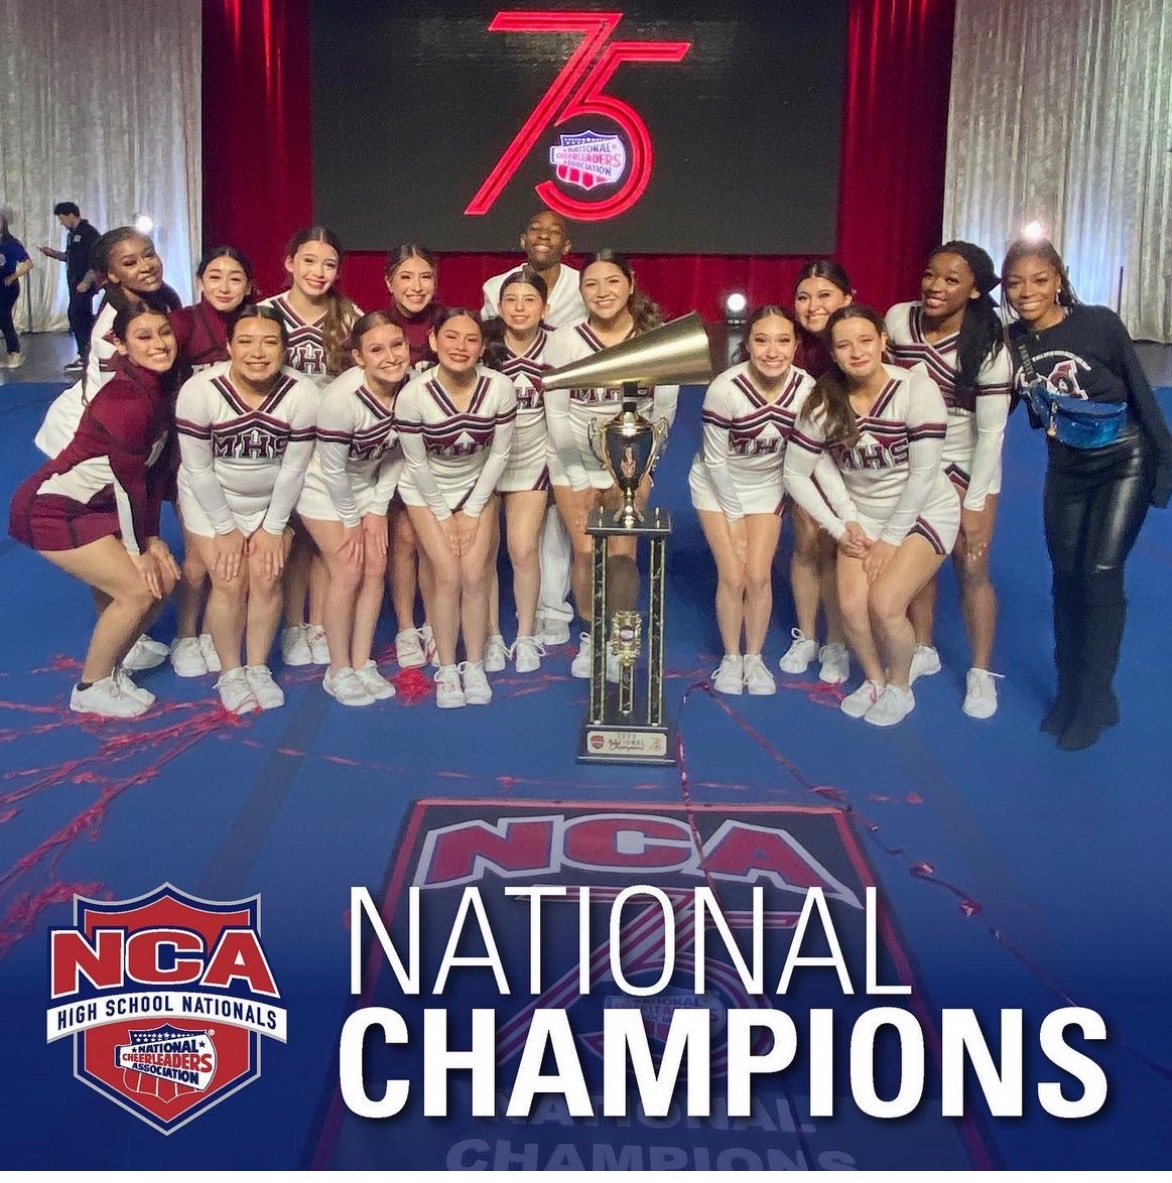 Cheer squads win big at Nationals | Northside School District